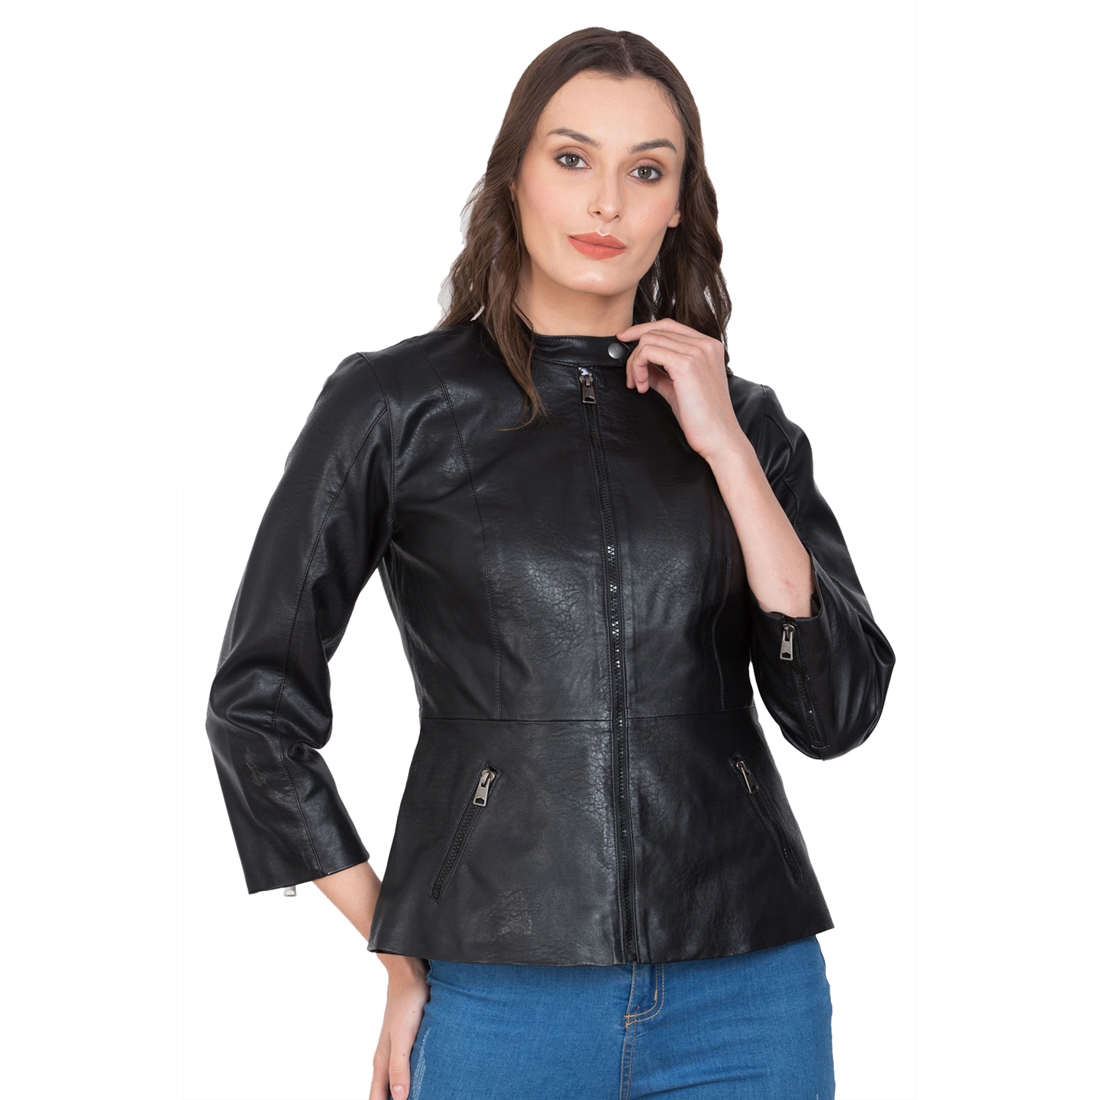 Justanned | JUSTANNED RAVEN WOMEN LEATHER JACKET